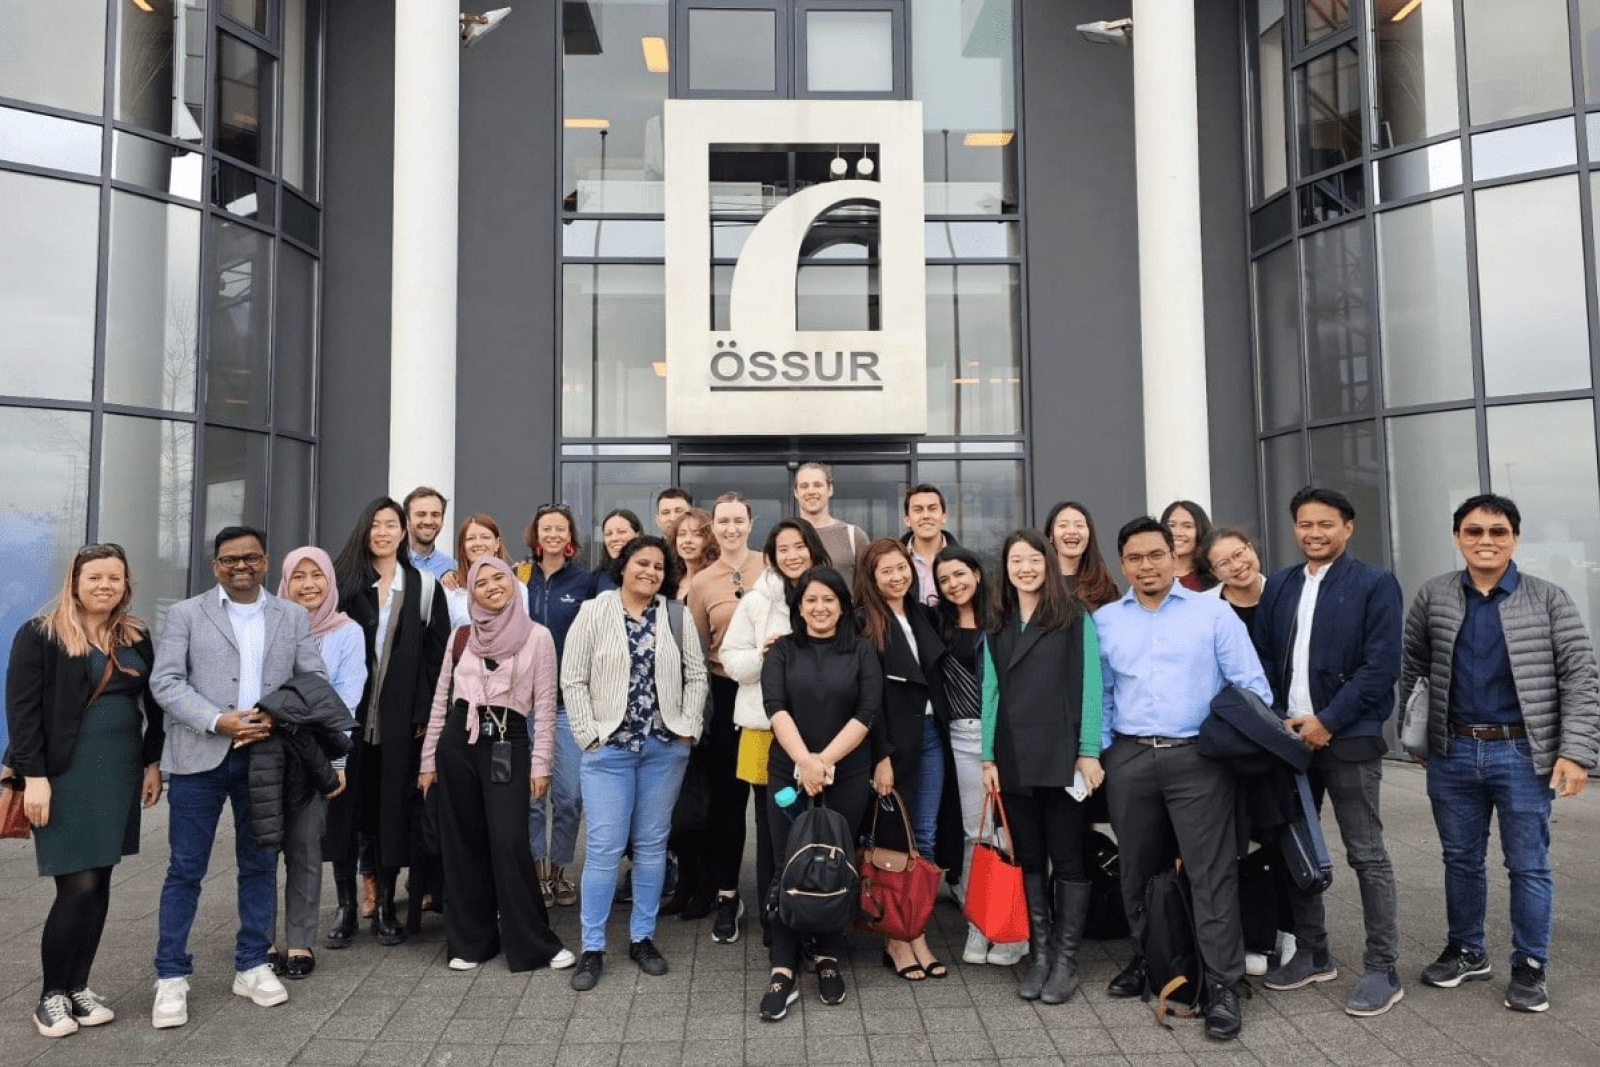 MBA students pictured outside Ossur on their recent Student Trek to Iceland